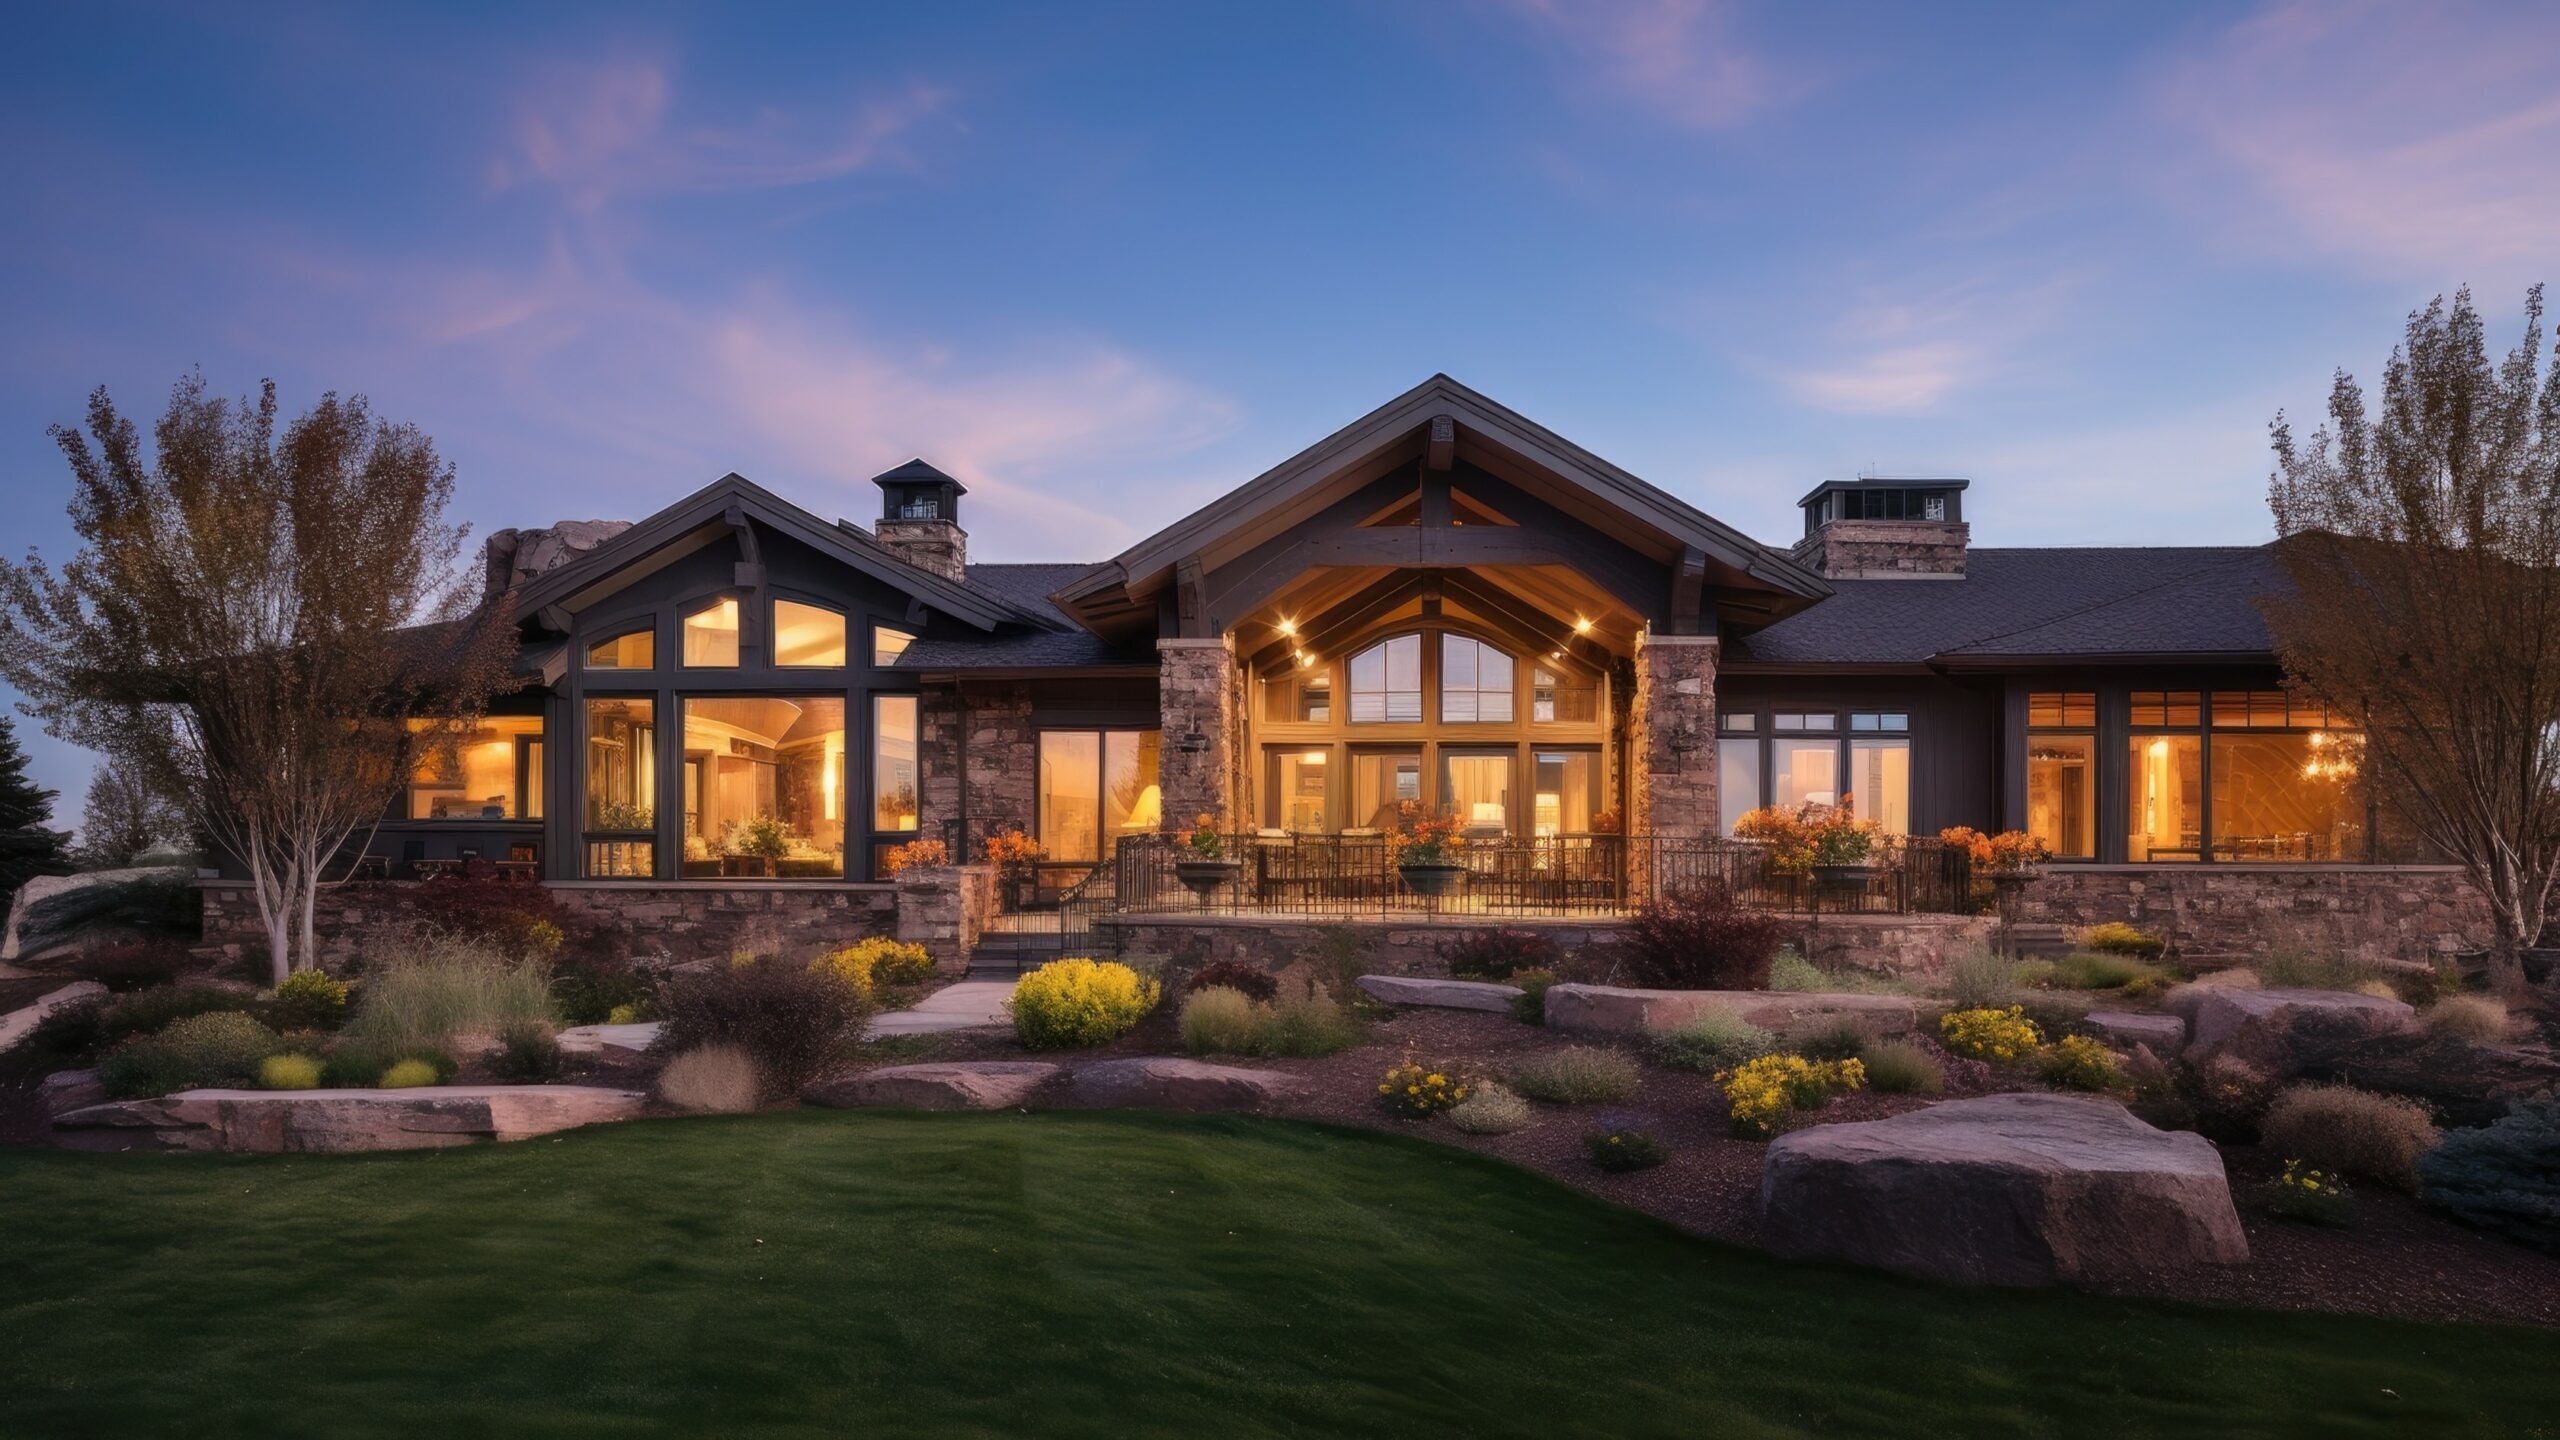 Ranch-style home exterior illuminated by lights